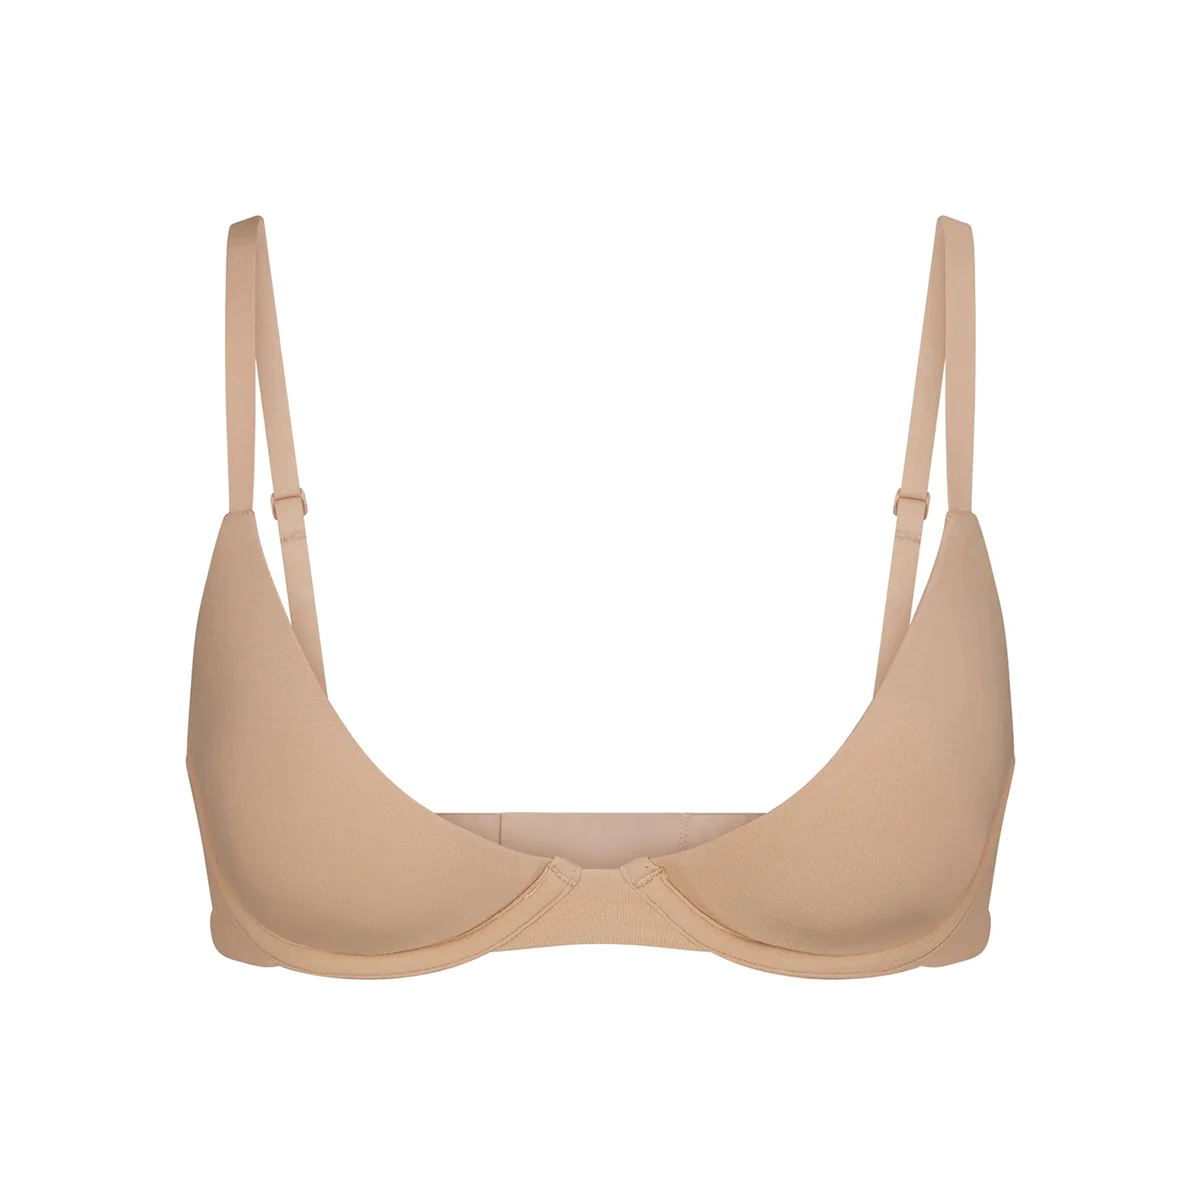 Sultry Sophistication: Elevate Your Look with a Plunge Bra